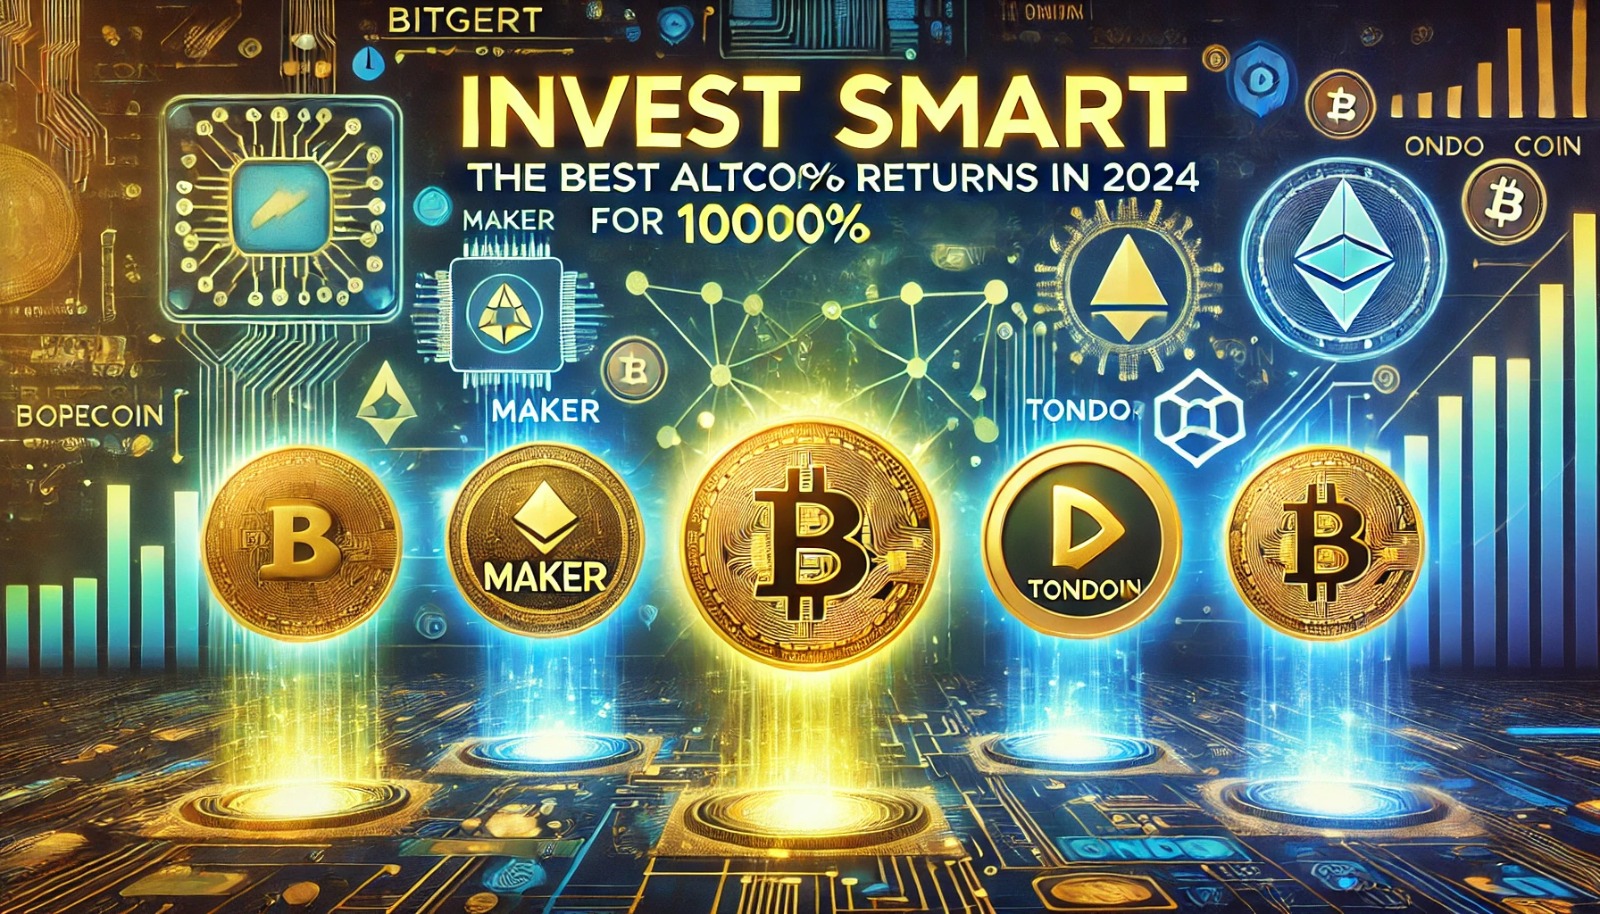 Invest Smart: The Best Altcoins for 1000% Returns in 2024: